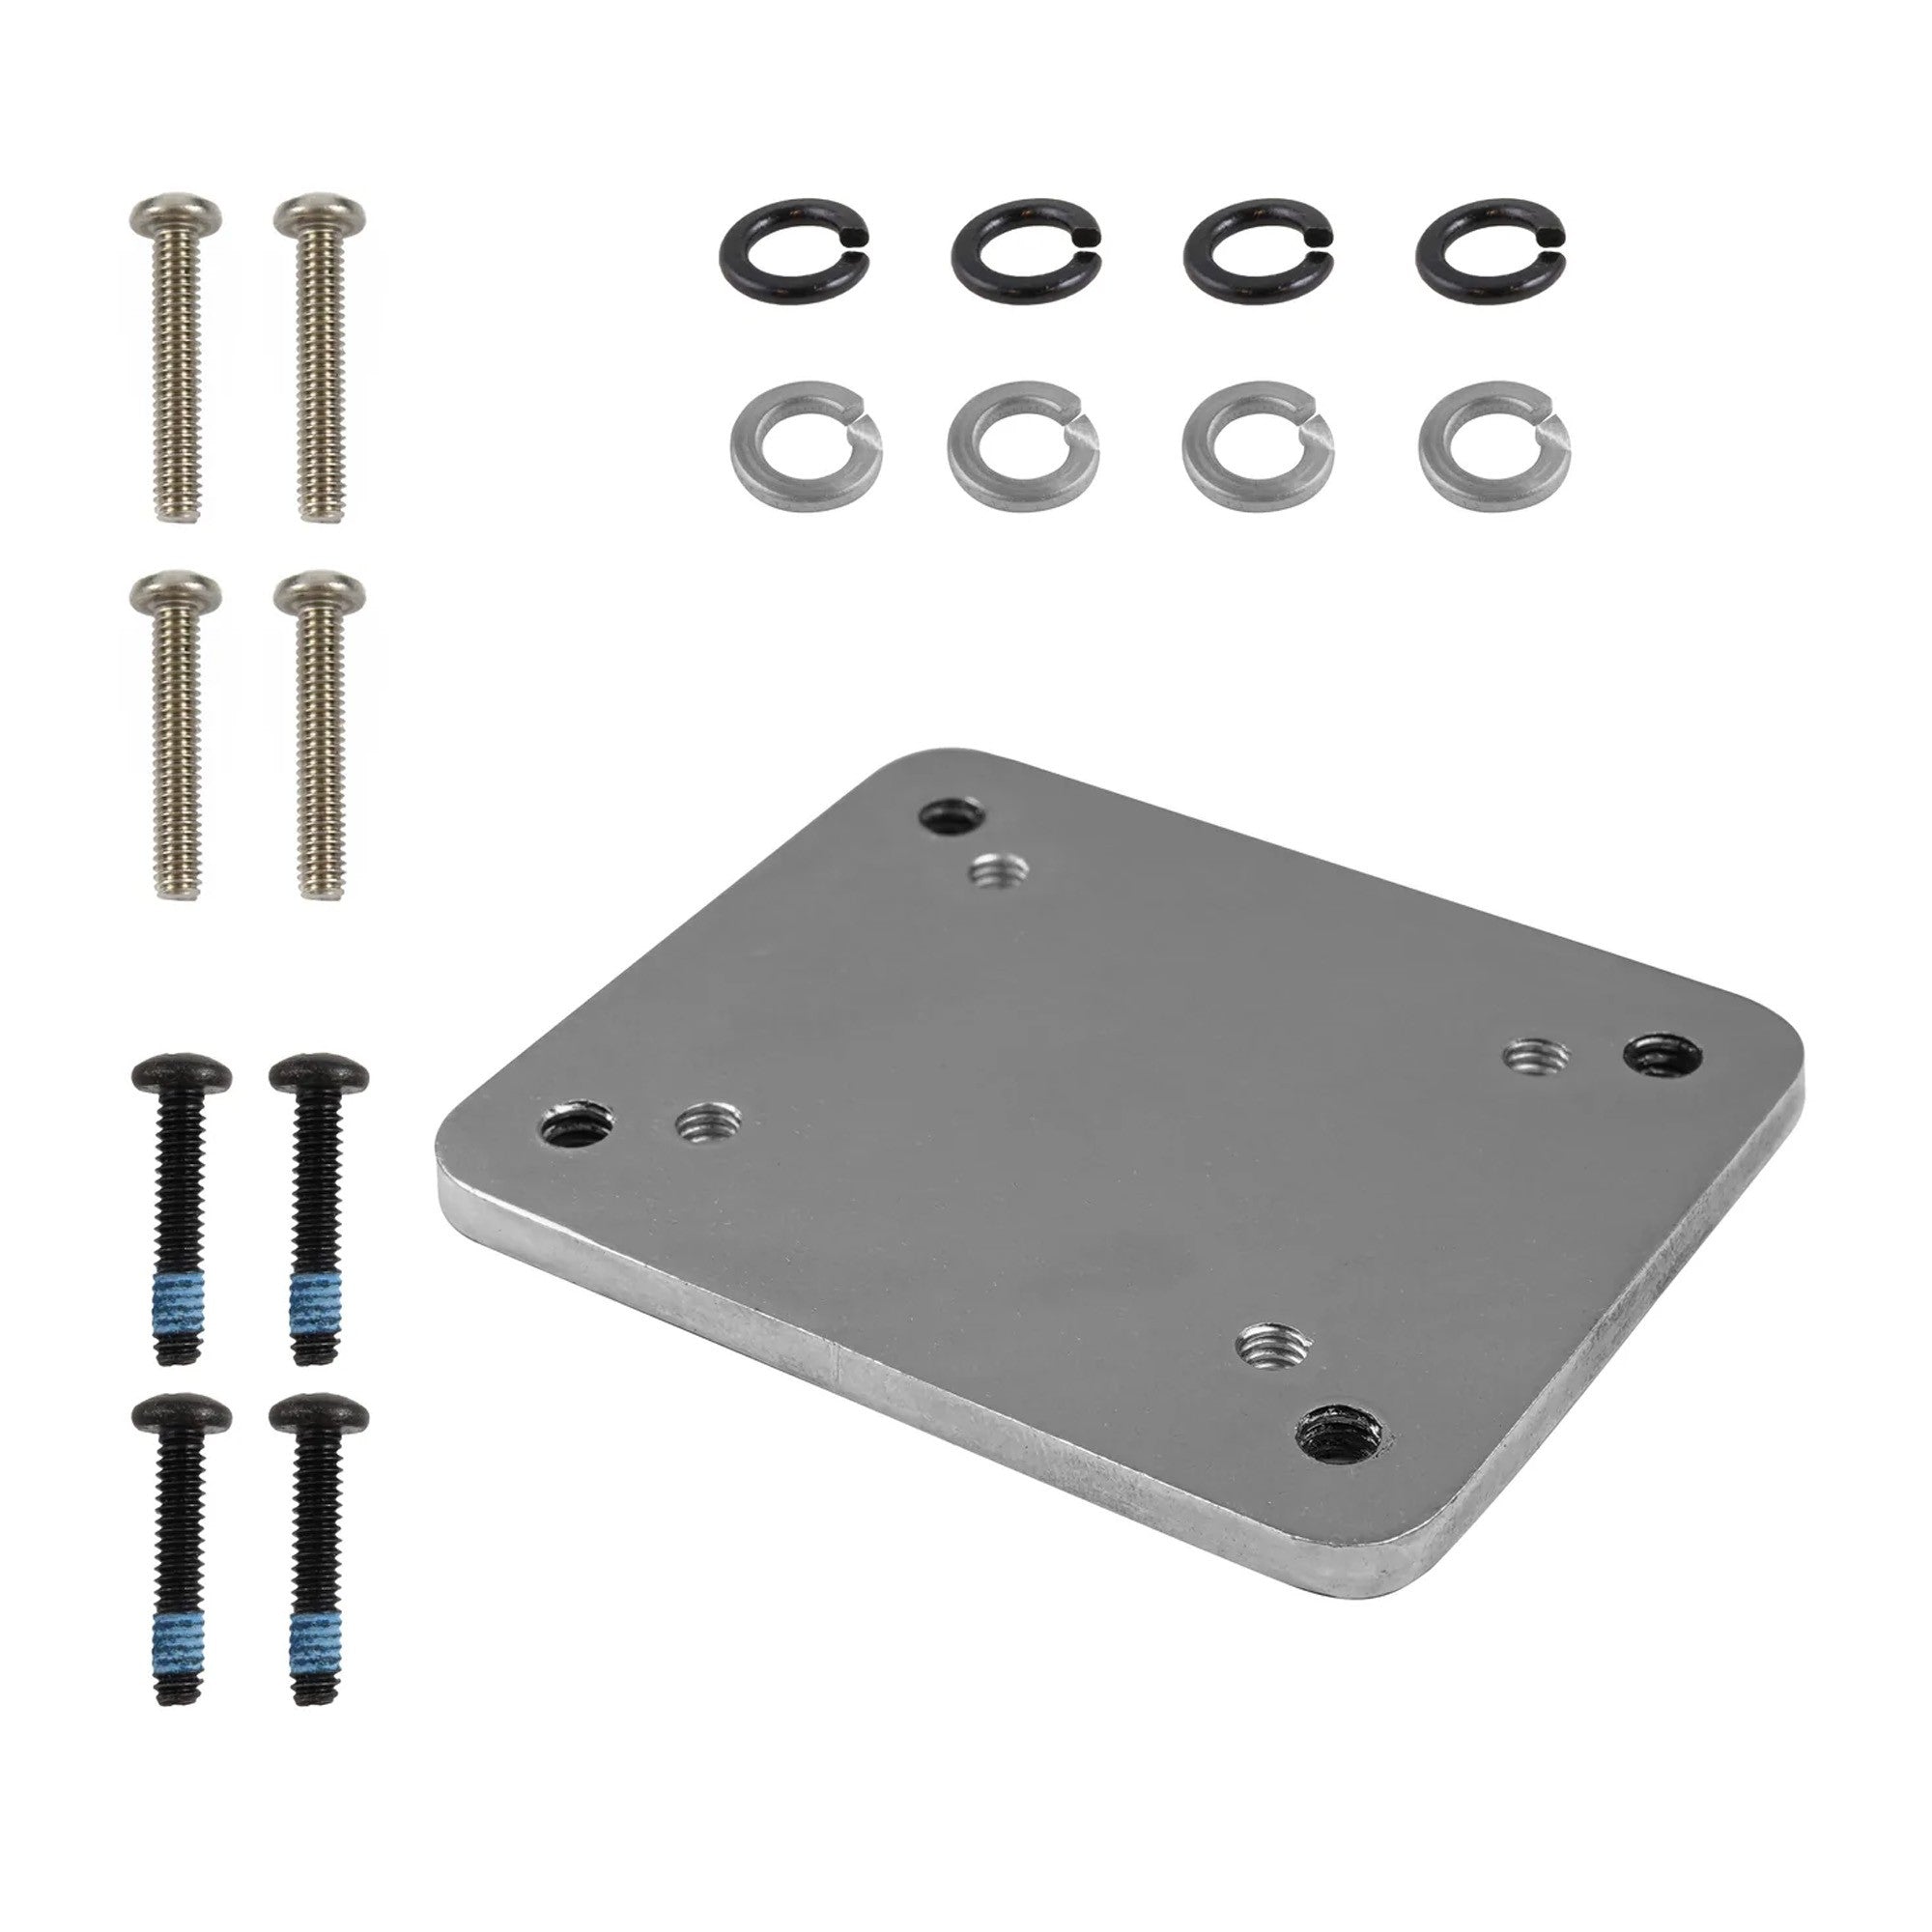 RAM Backing Plate Adapter - 4-Hole AMPS